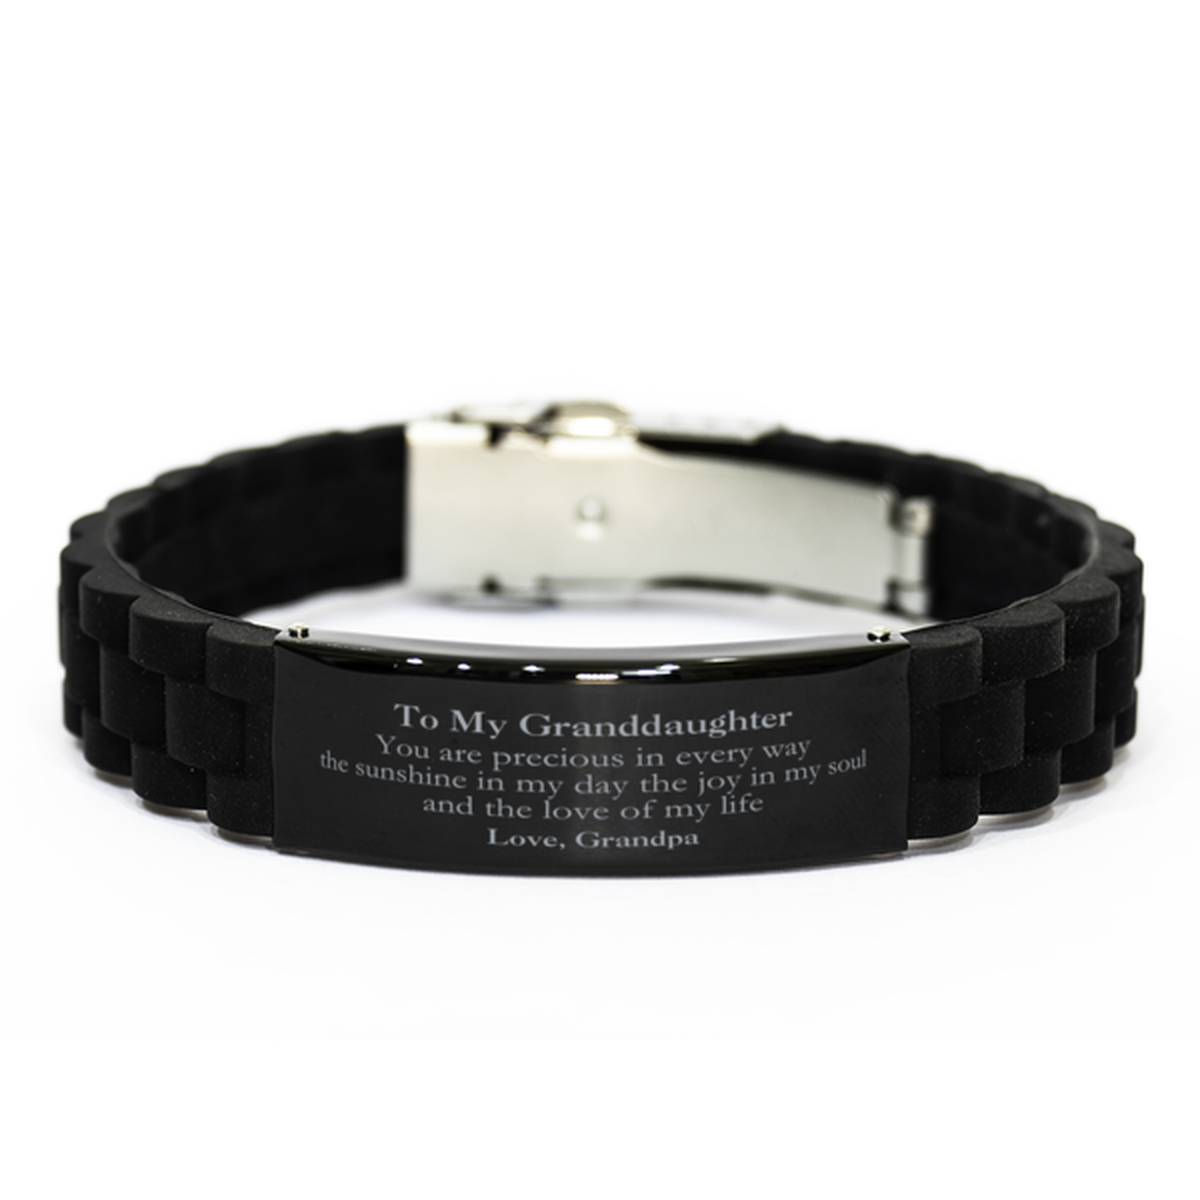 Graduation Gifts for Granddaughter Black Glidelock Clasp Bracelet Present from Grandpa, Christmas Granddaughter Birthday Gifts Granddaughter You are precious in every way the sunshine in my day. Love, Grandpa